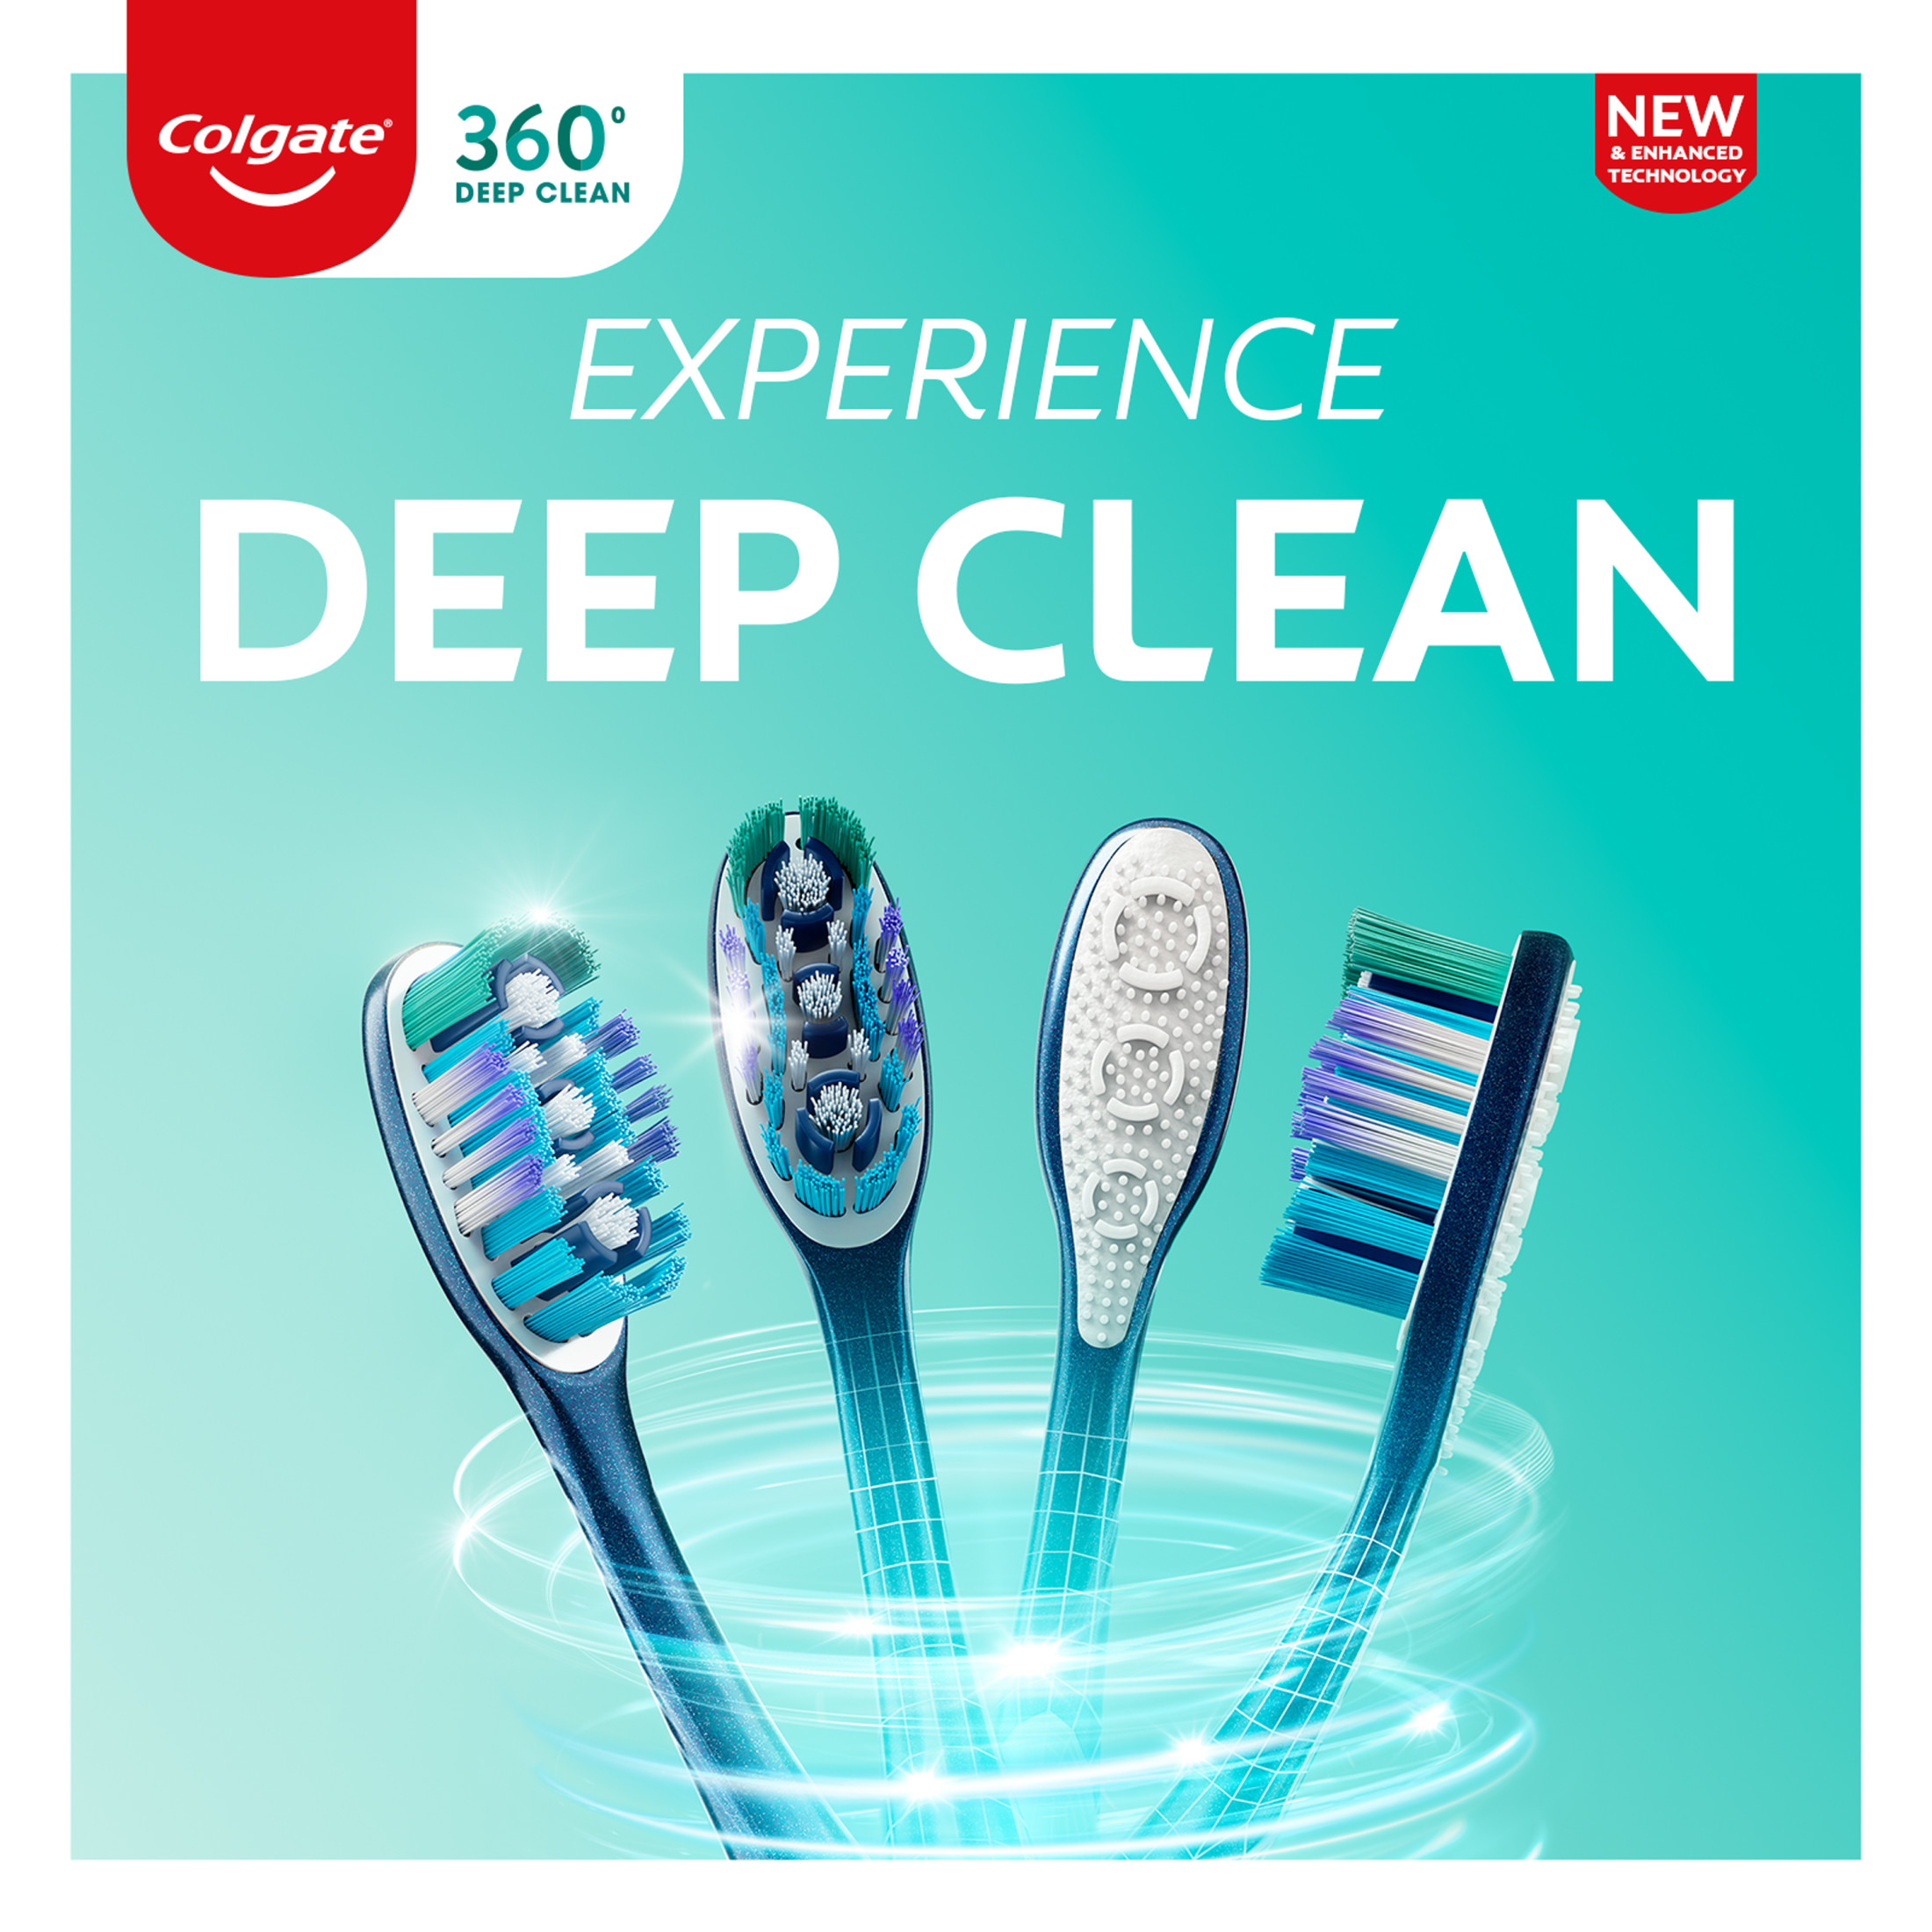 Colgate 360 Whole Mouth Clean Medium Toothbrush, Adult Toothbrush, 4 Pack - image 2 of 14